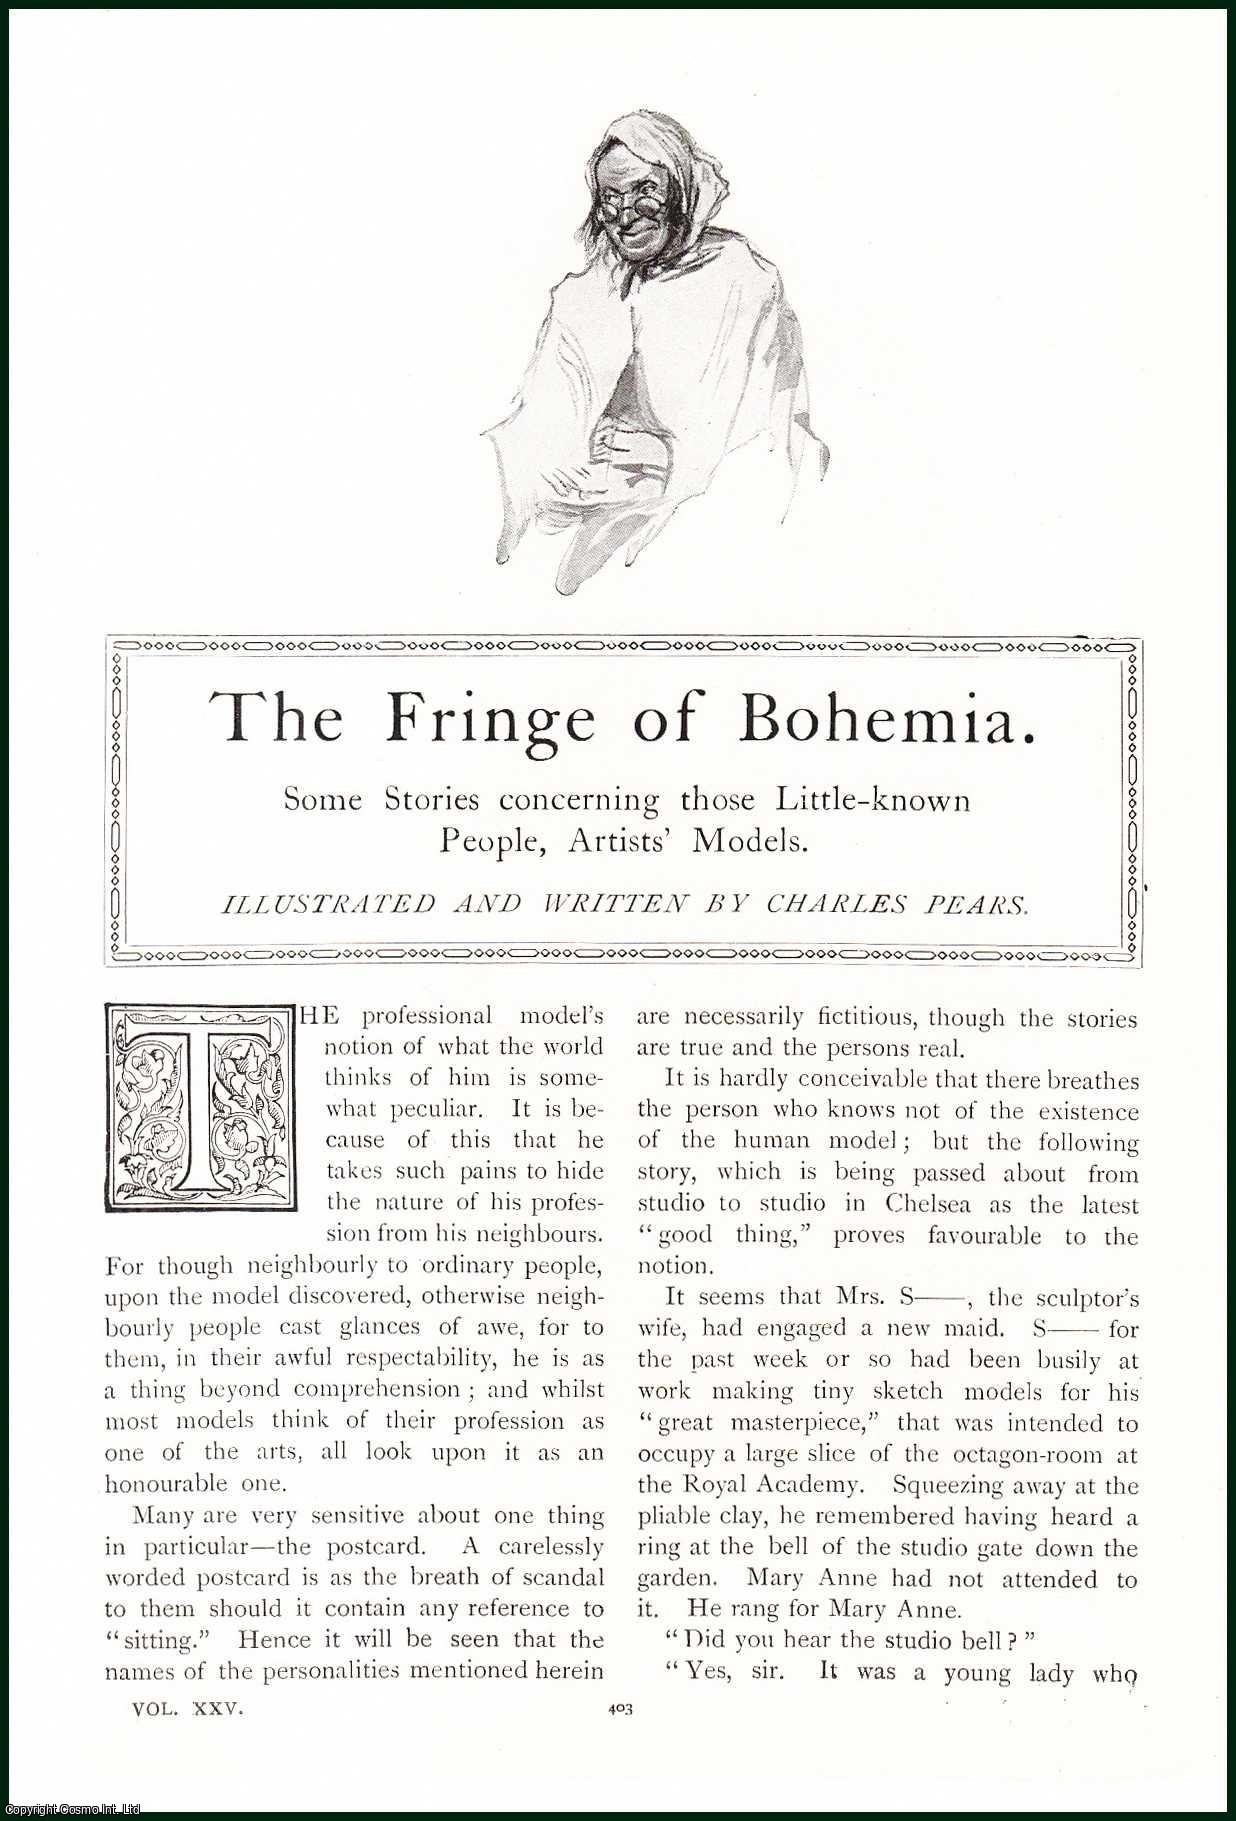 Written & illustrated by Charles Pears. - The Fringe of Bohemia : some stories concerning those little-known people, artists models. An uncommon original article from the Lady's Realm, 1909.